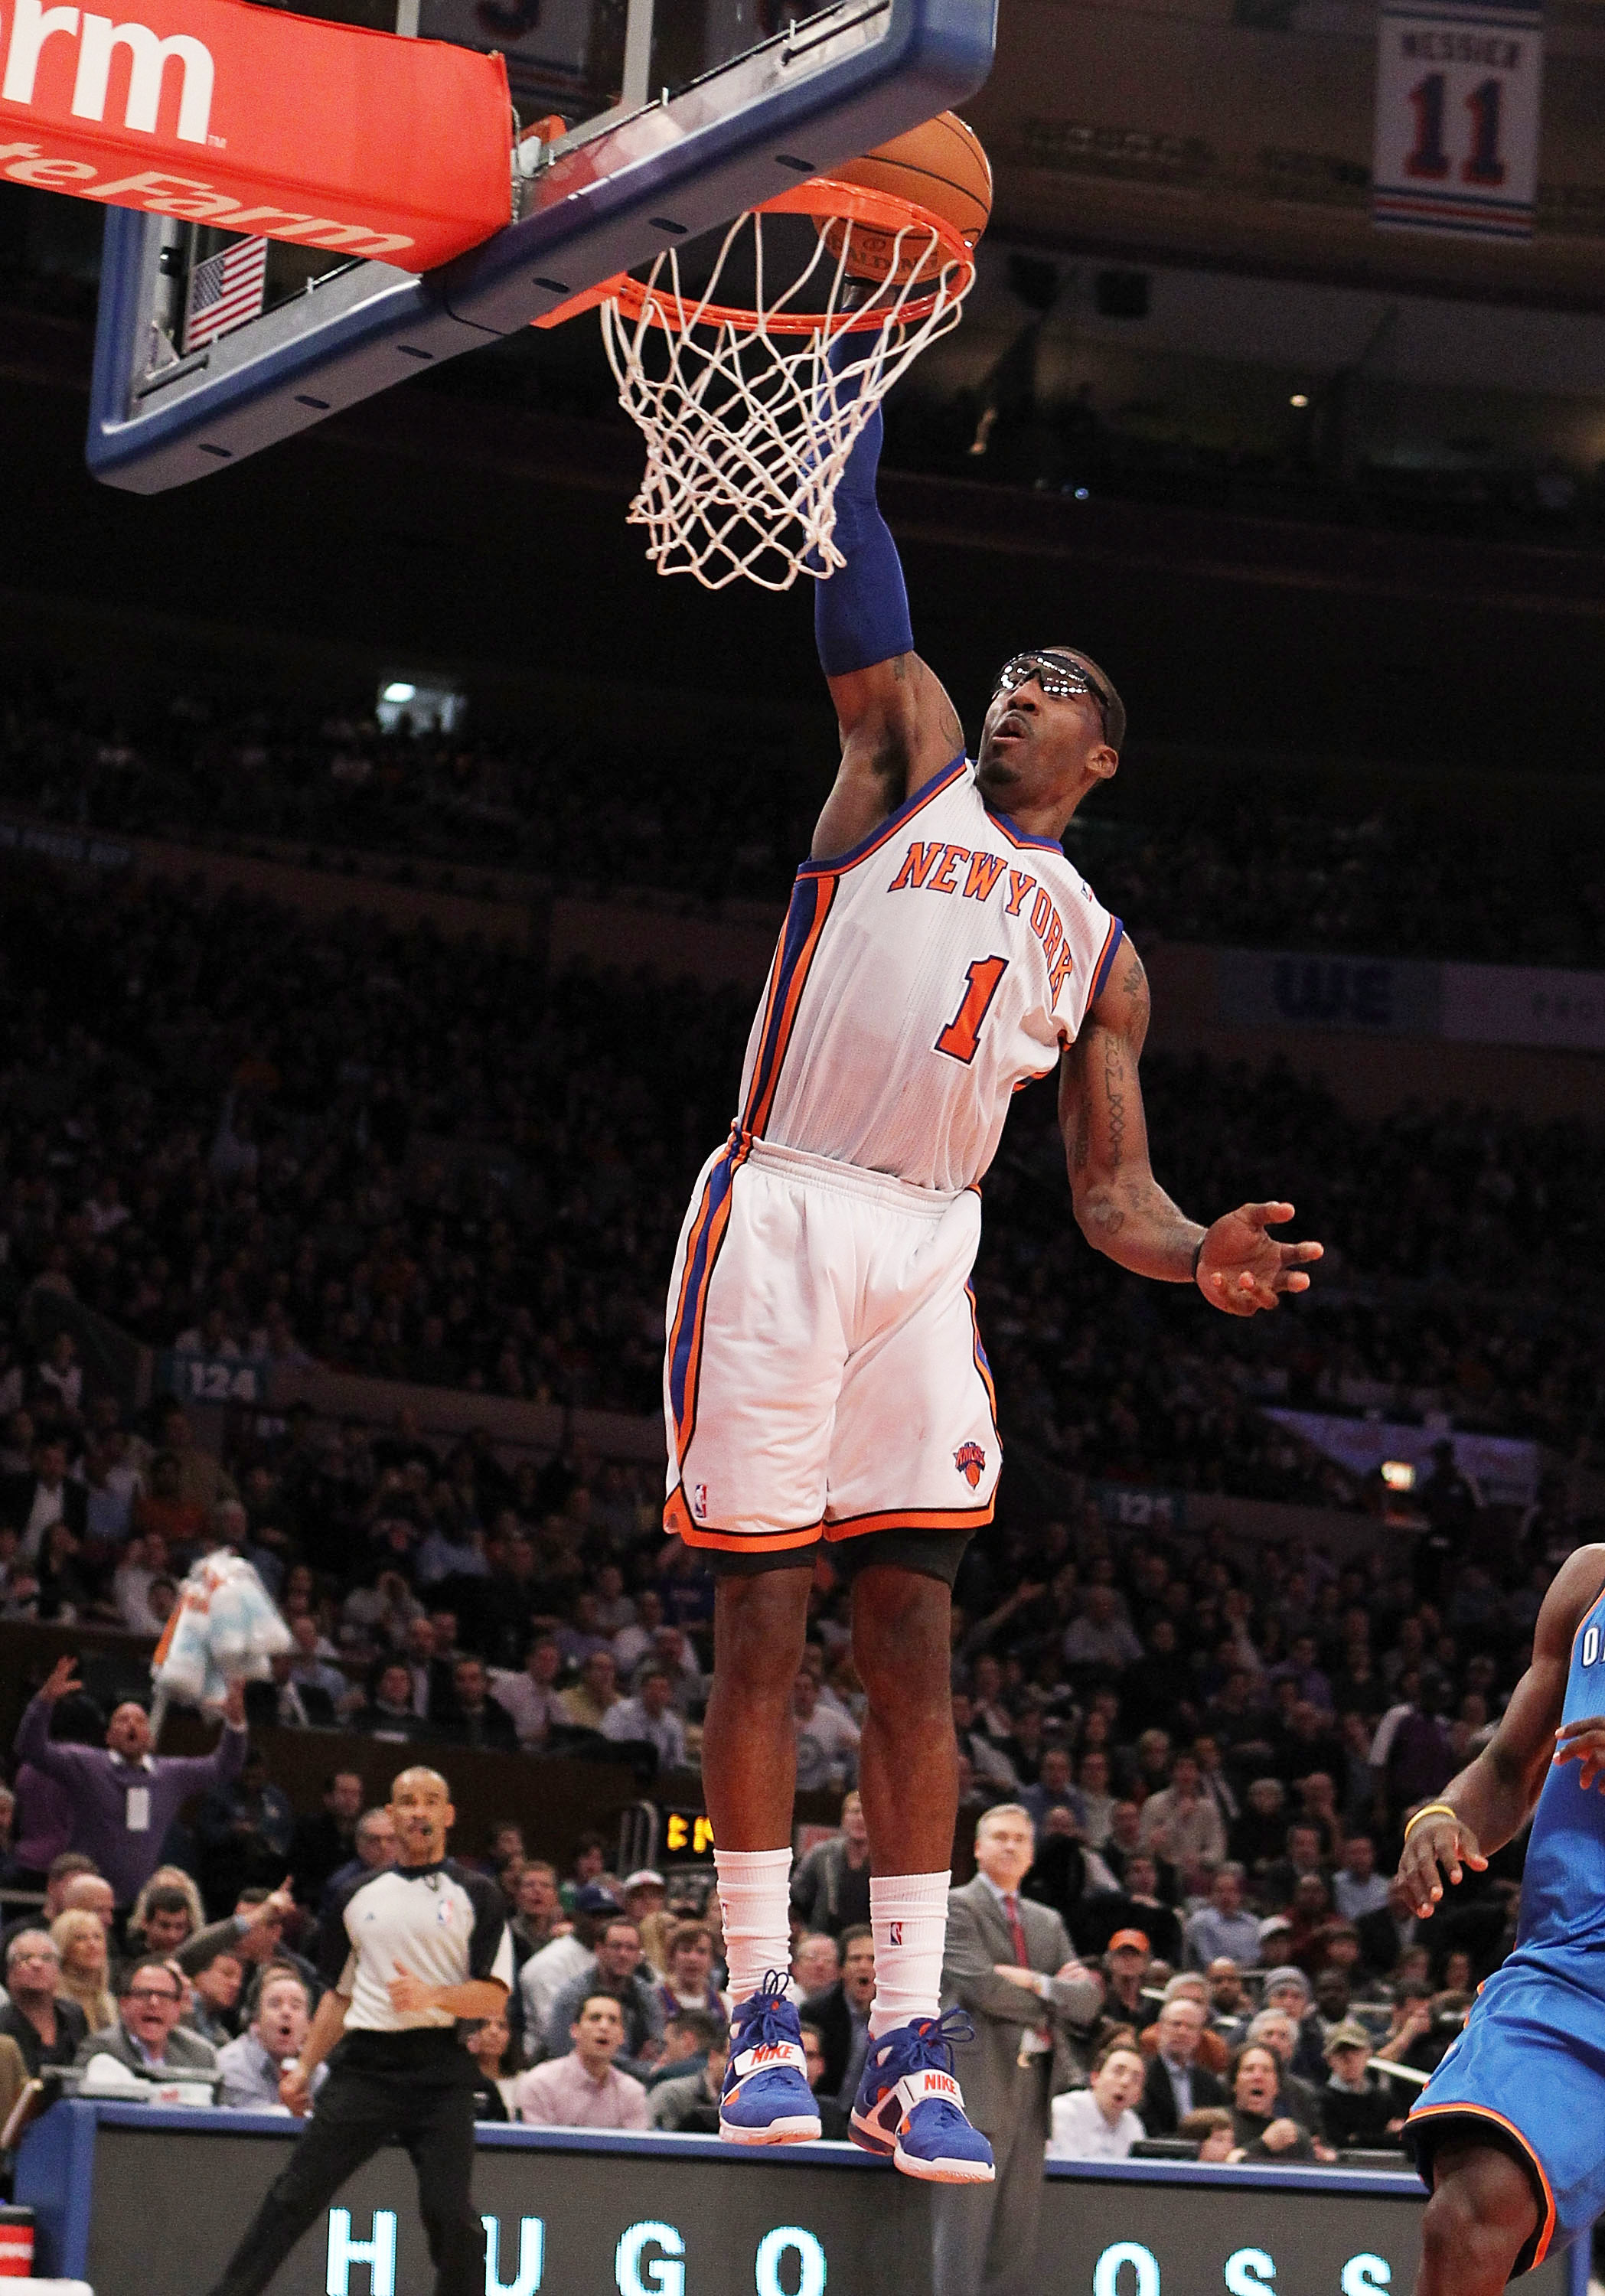 NEW YORK, NY - DECEMBER 22:  Amar'e Stoudemire #1 of the New York Knicks dunks the ball against  the Oklahoma City Thunder at Madison Square Garden on December 22, 2010 in New York City.   NOTE TO USER: User expressly acknowledges and agrees that, by down